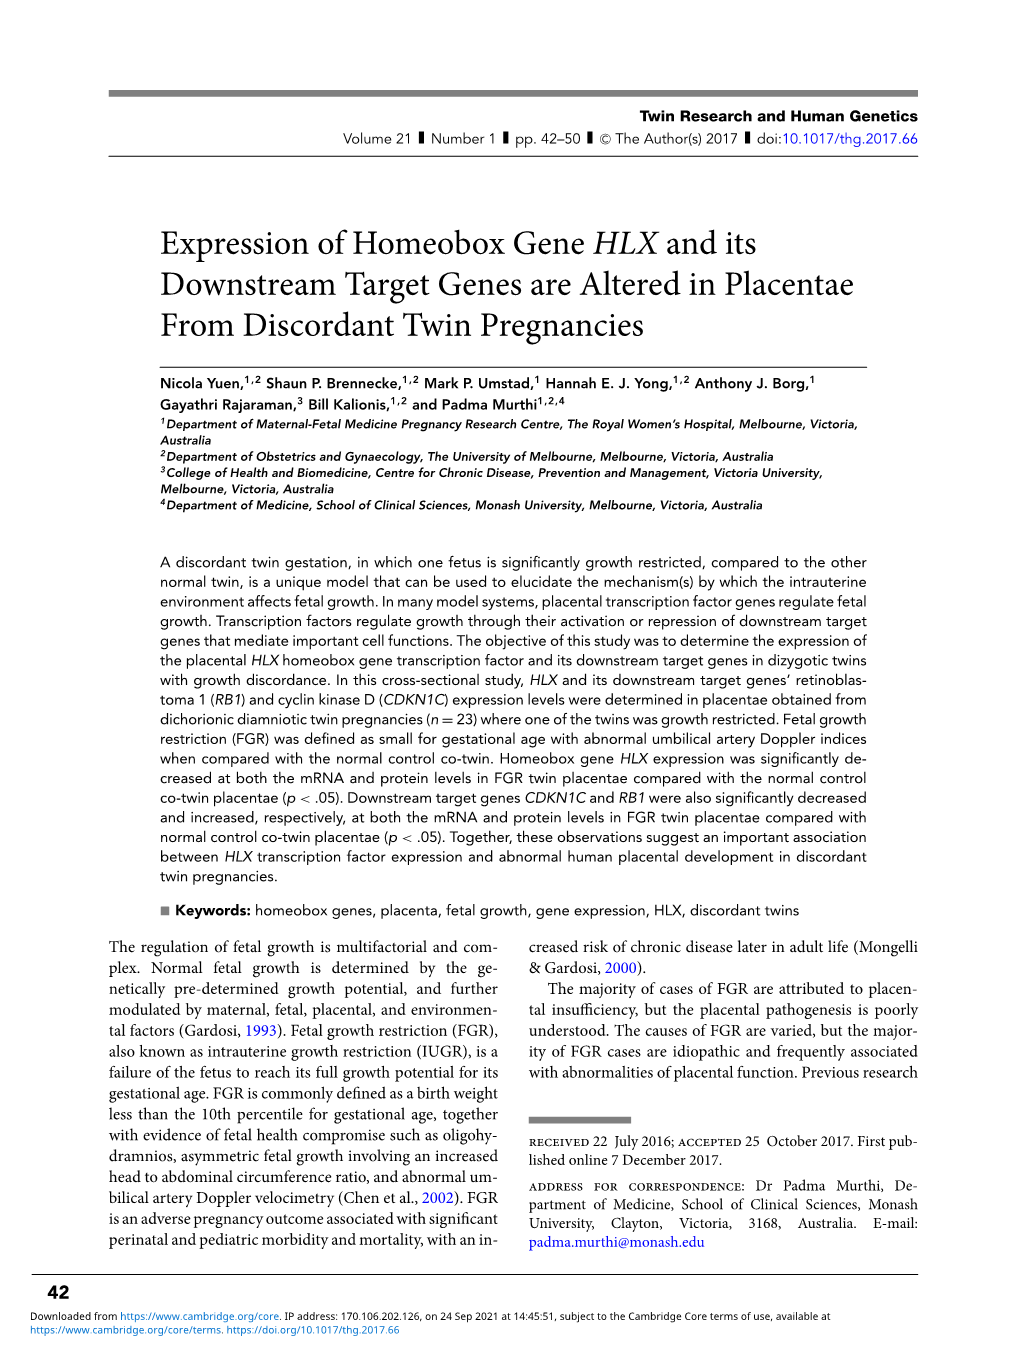 Expression of Homeobox Gene HLX and Its Downstream Target Genes Are Altered in Placentae from Discordant Twin Pregnancies